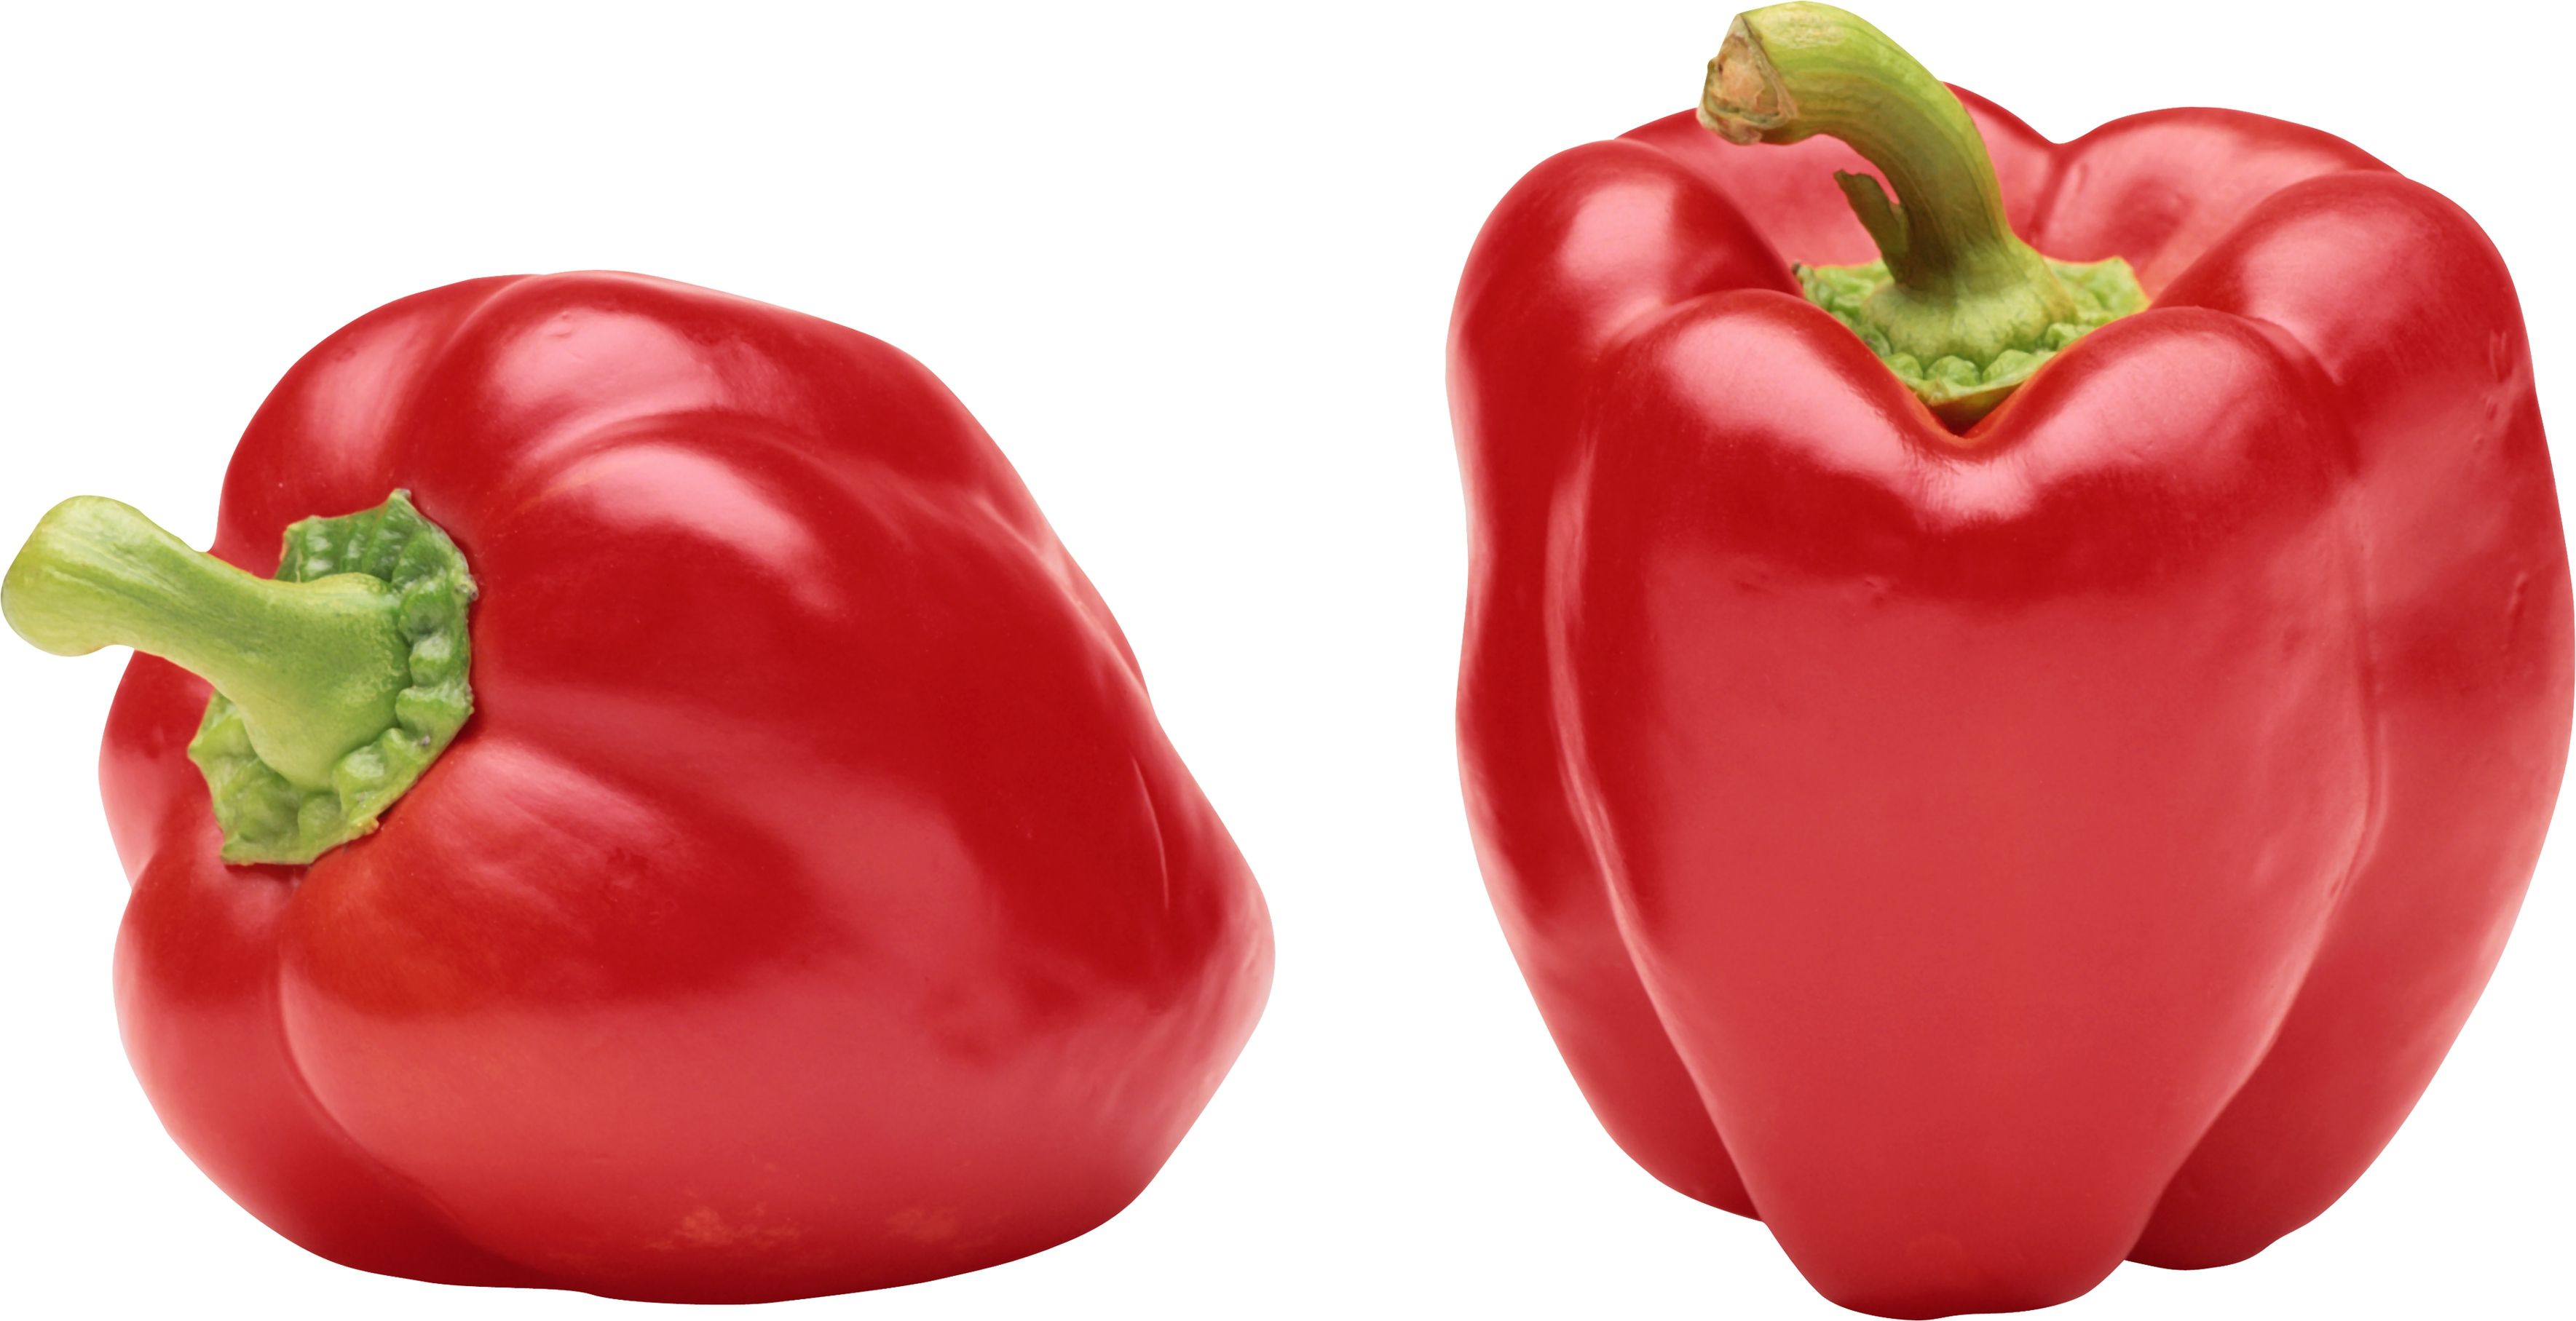 Peppers Wallpaper Image Photo Picture Background